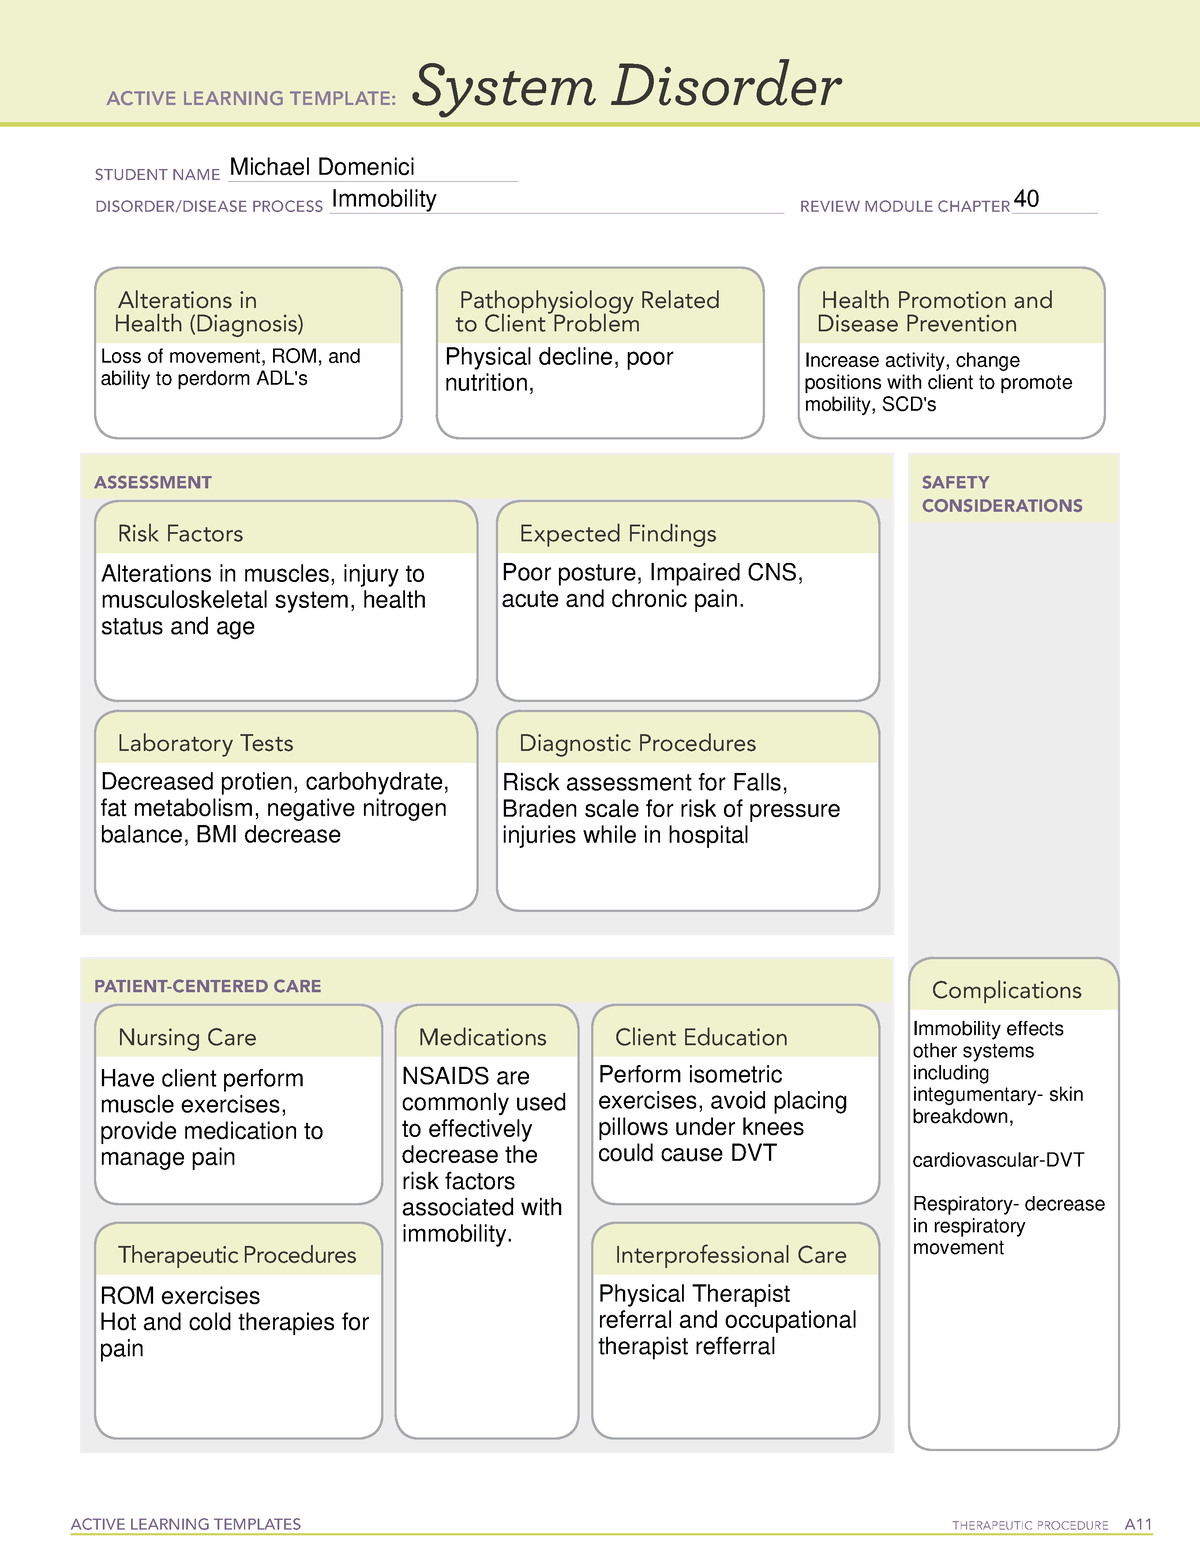 Active Learning Template System Disorder 3 ACTIVE LEARNING TEMPLATES